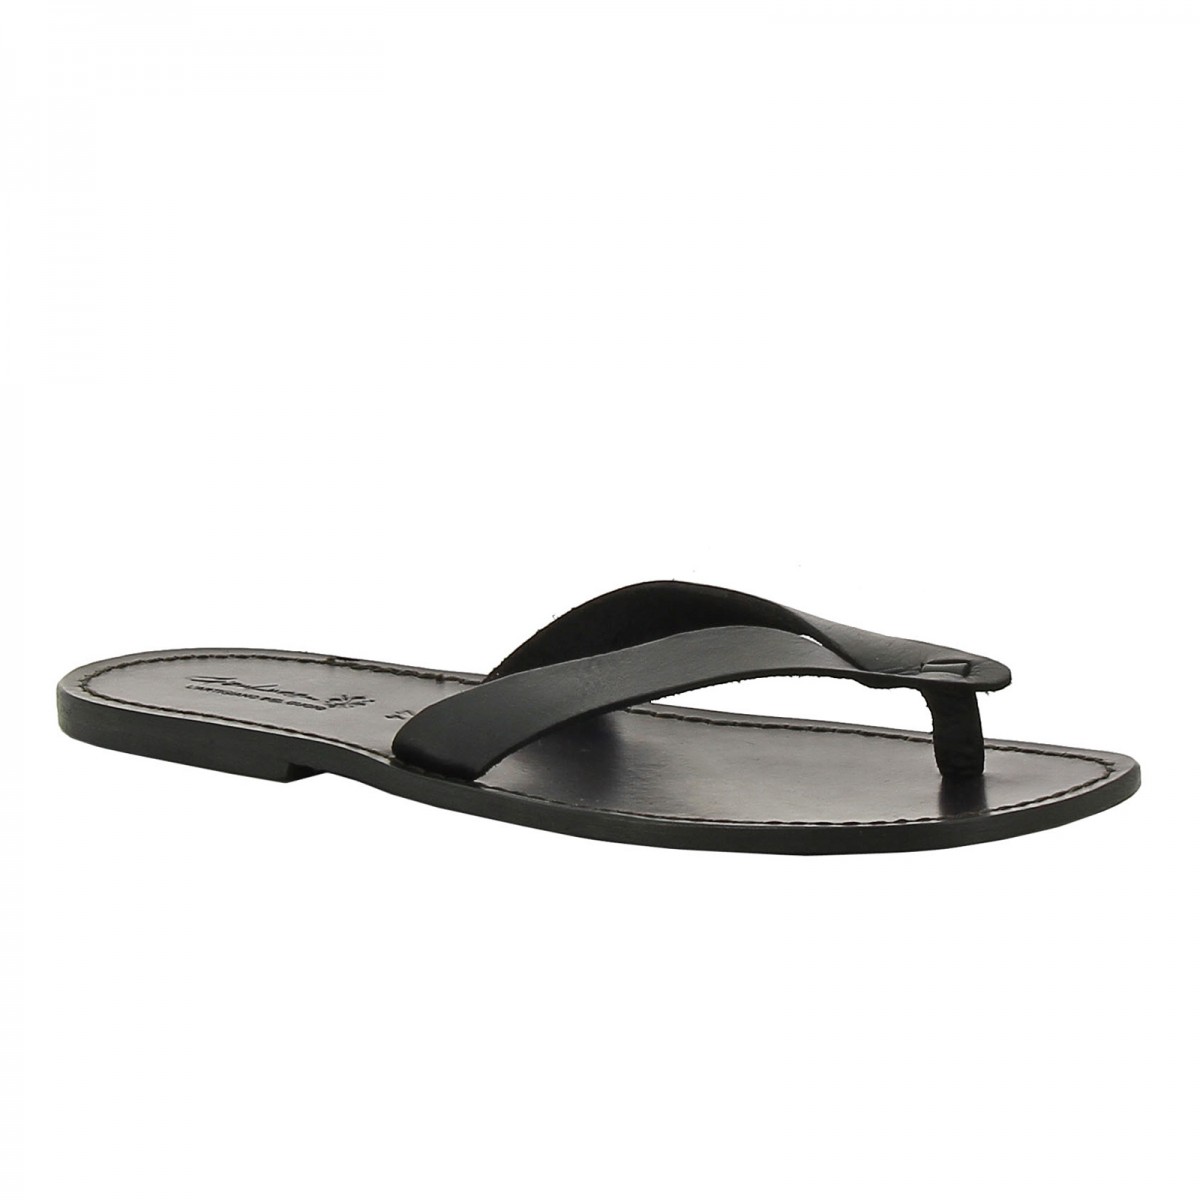 Details more than 137 mens leather thong sandals latest - netgroup.edu.vn